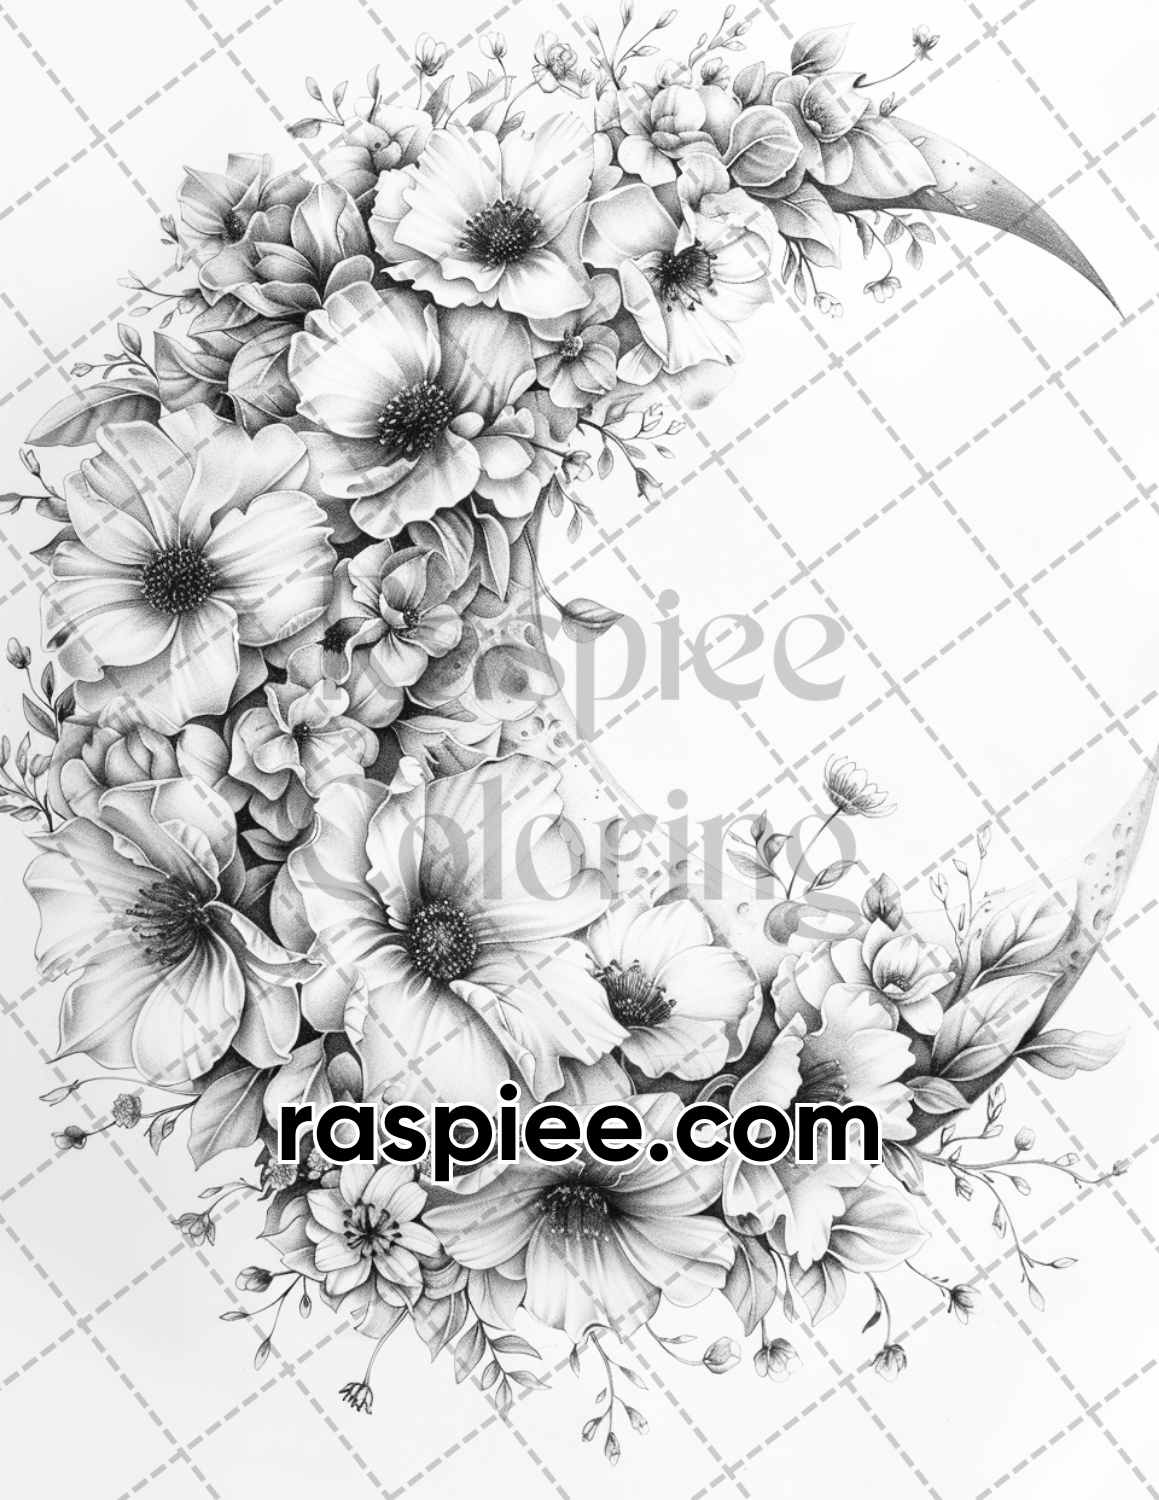 adult coloring pages, adult coloring sheets, adult coloring book pdf, adult coloring book printable, grayscale coloring pages, grayscale coloring books, grayscale illustration, boho moon floral adult coloring pages, boho moon floral coloring book